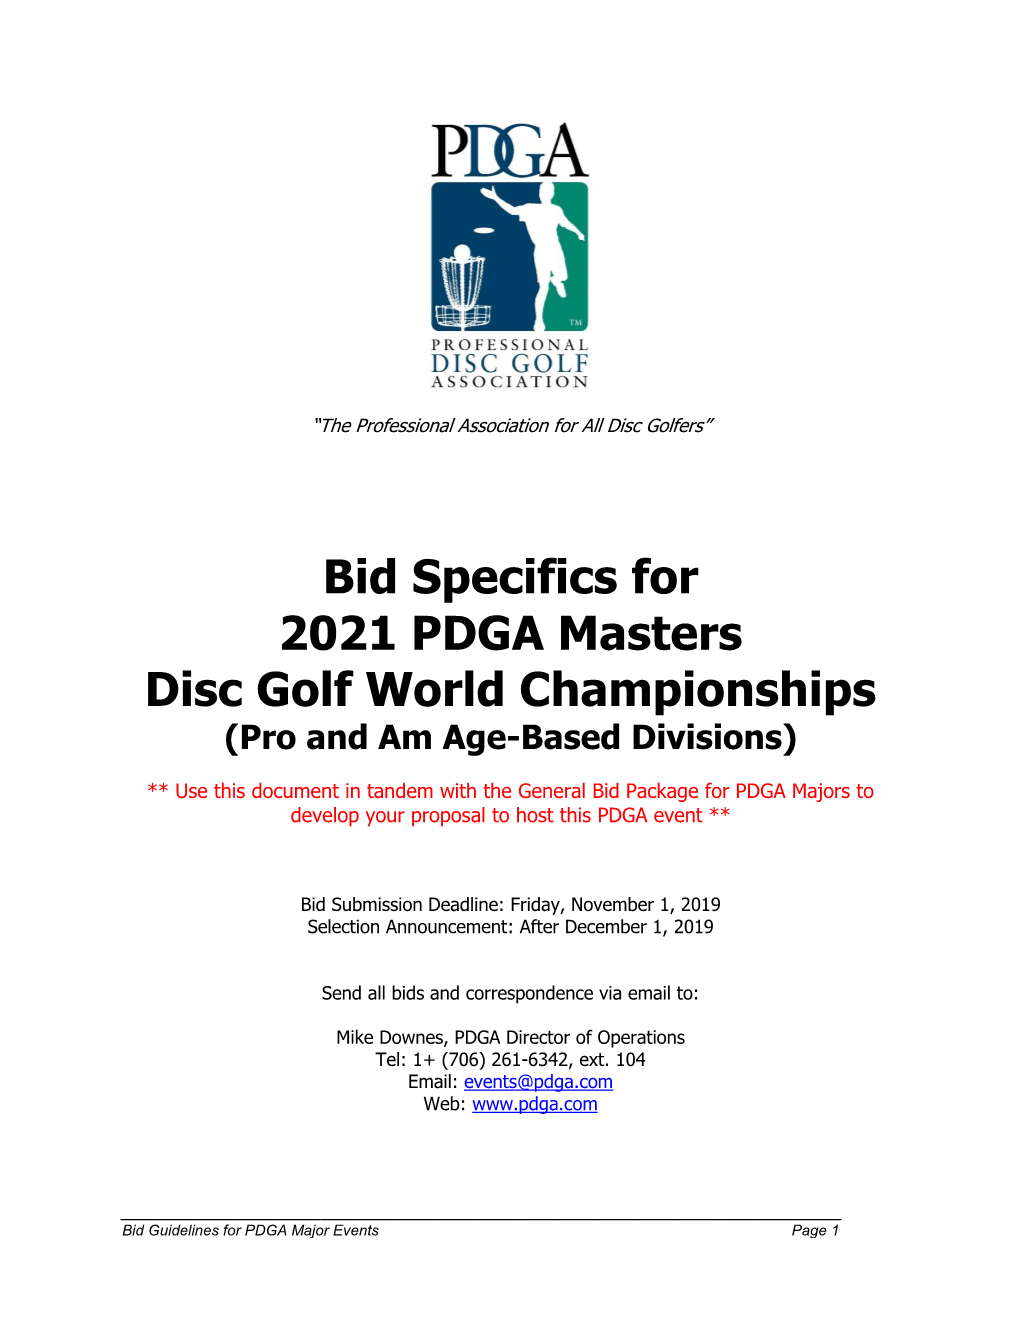 Bid Specifics for 2021 PDGA Masters Disc Golf World Championships (Pro and Am Age-Based Divisions)